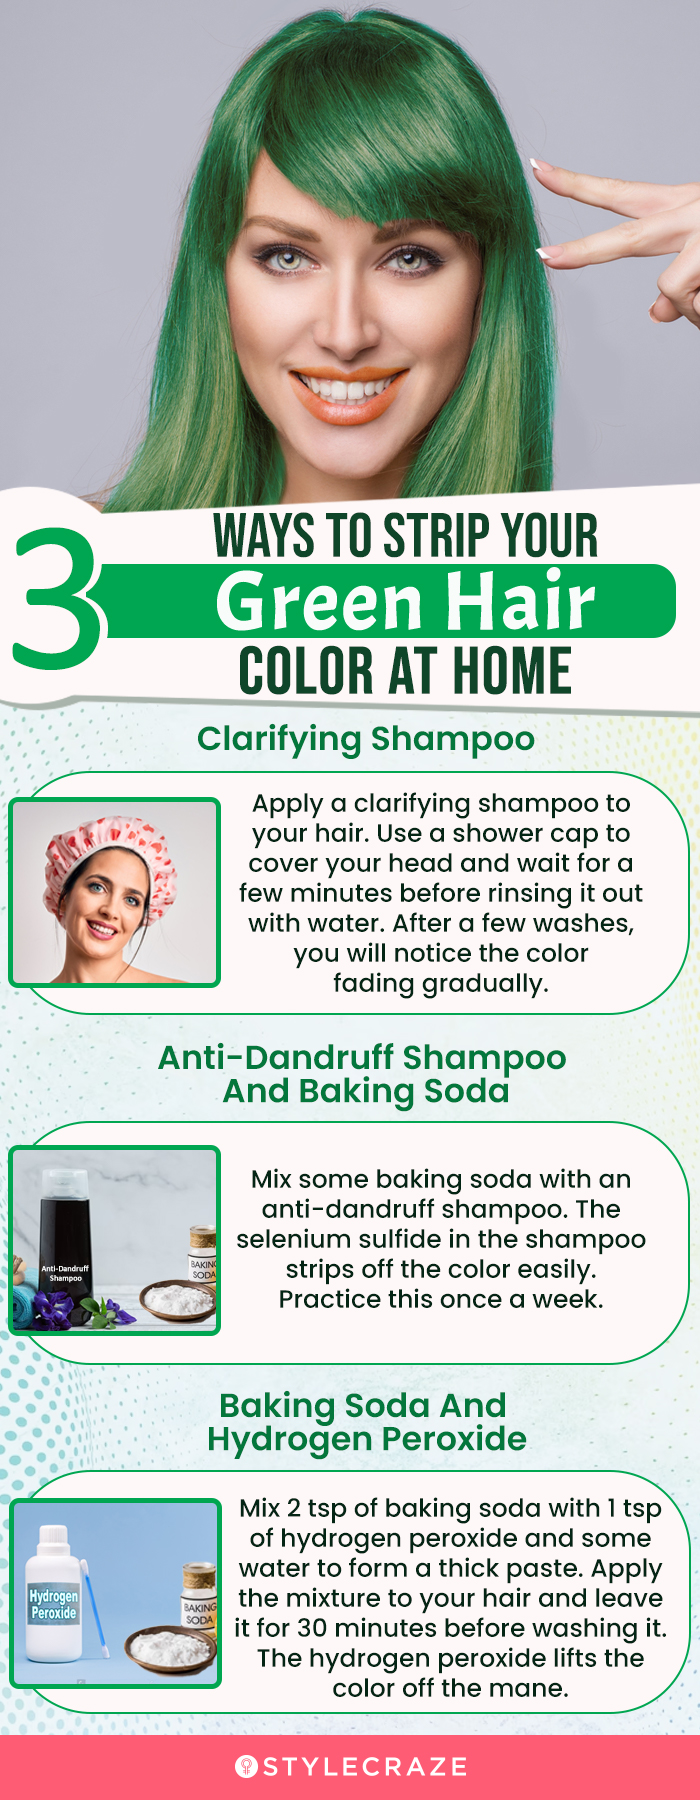 3 ways to strip your green hair color at home (infographic)